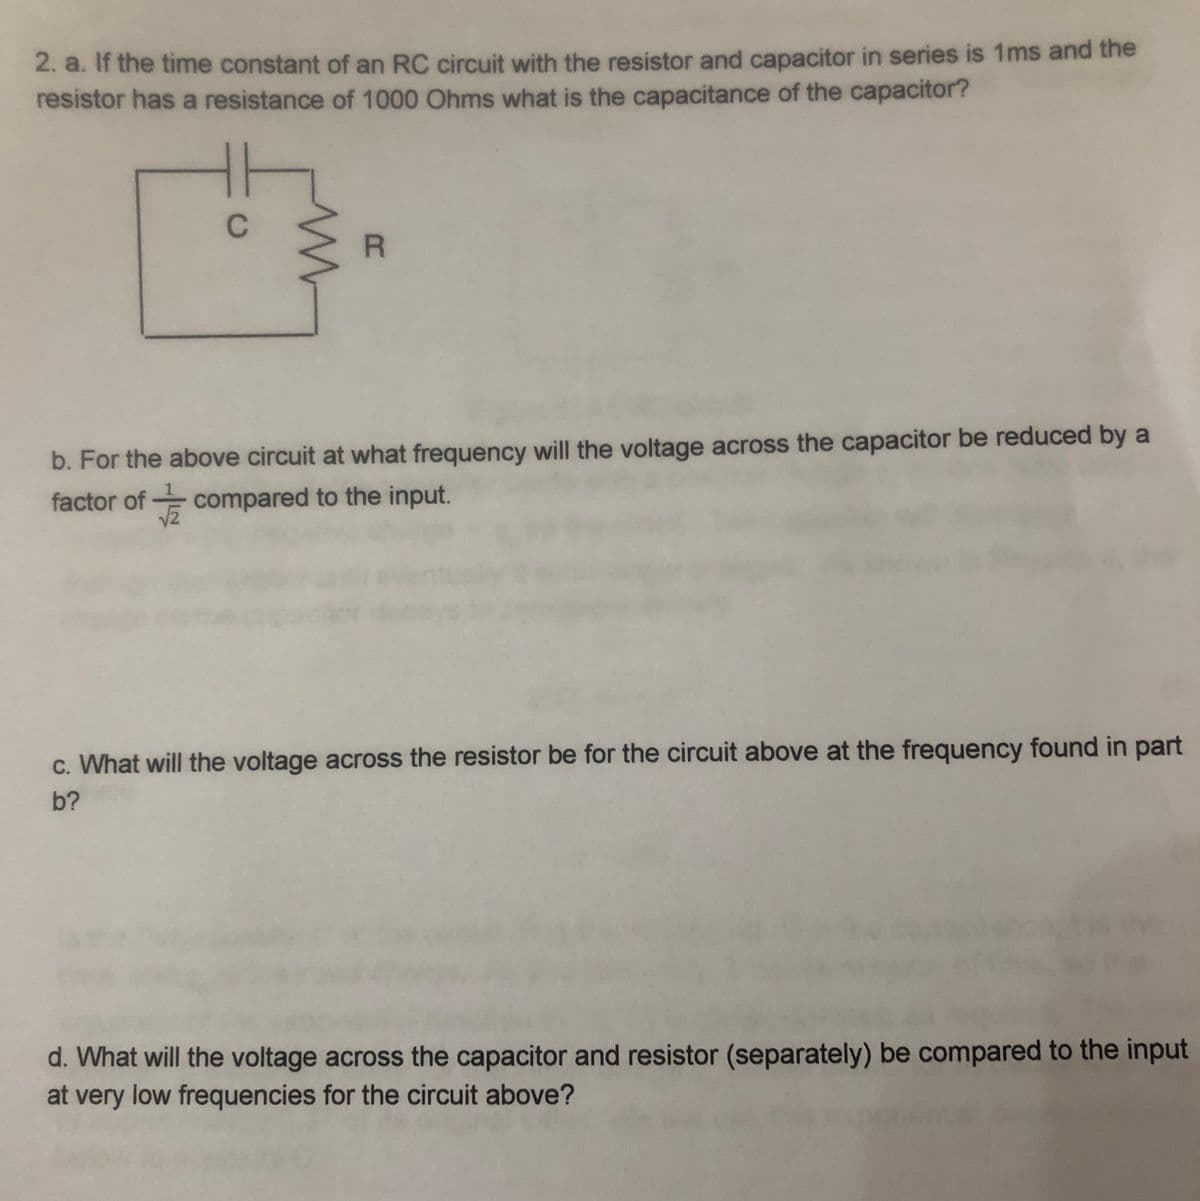 2. a. If the time constant of an RC circuit with the resistor and capacitor in series is 1ms and the
resistor has a resistance of 1000 Ohms what is the capacitance of the capacitor?
C
R
b. For the above circuit at what frequency will the voltage across the capacitor be reduced by a
factor of compared to the input.
c. What will the voltage across the resistor be for the circuit above at the frequency found in part
b?
d. What will the voltage across the capacitor and resistor (separately) be compared to the input
at very low frequencies for the circuit above?
